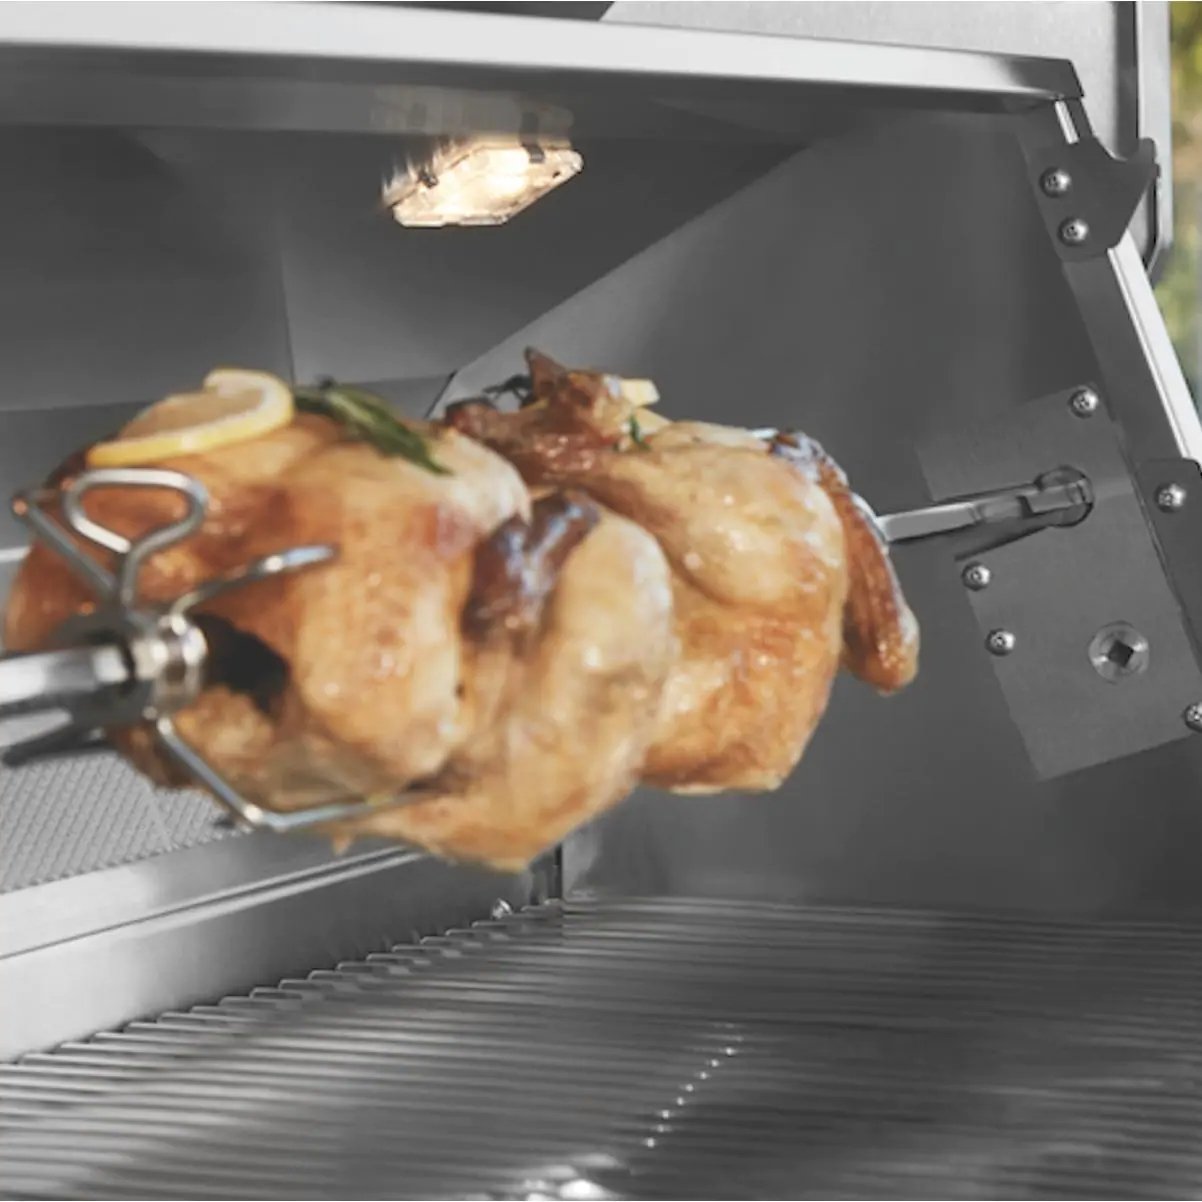 Twin Eagles 54-Inch 4-Burner Built-In Gas Grill with Sear Zone & Two Infrared Rotisserie Burners